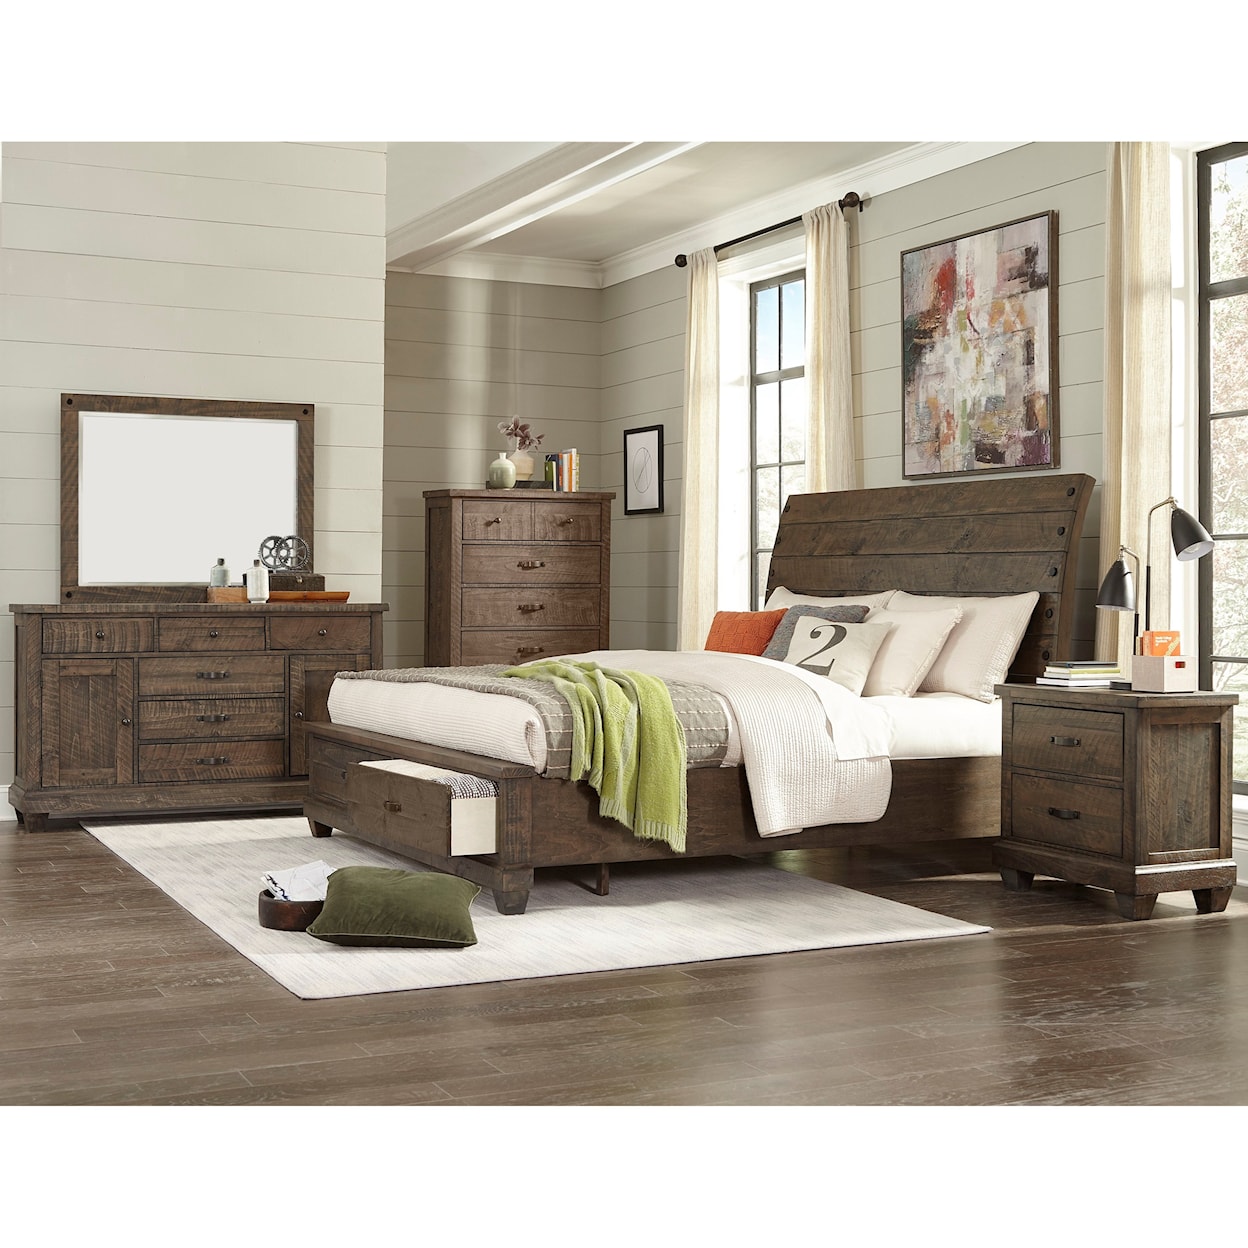 Lifestyle JD Mex Queen Sleigh Bed